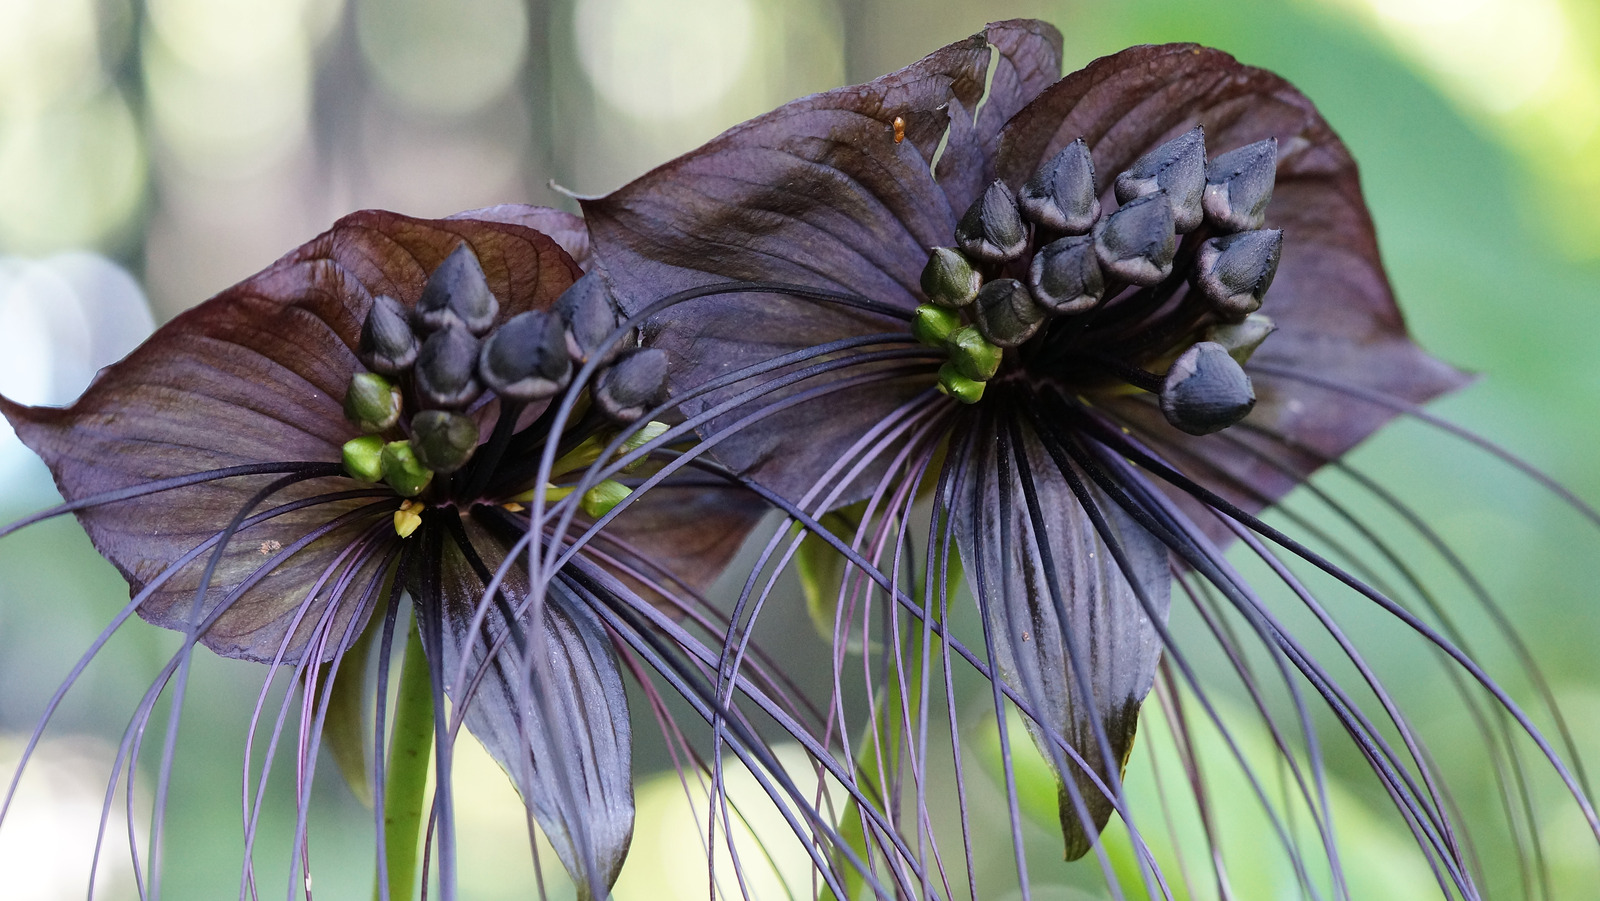 How To Care For A Black Bat Flower